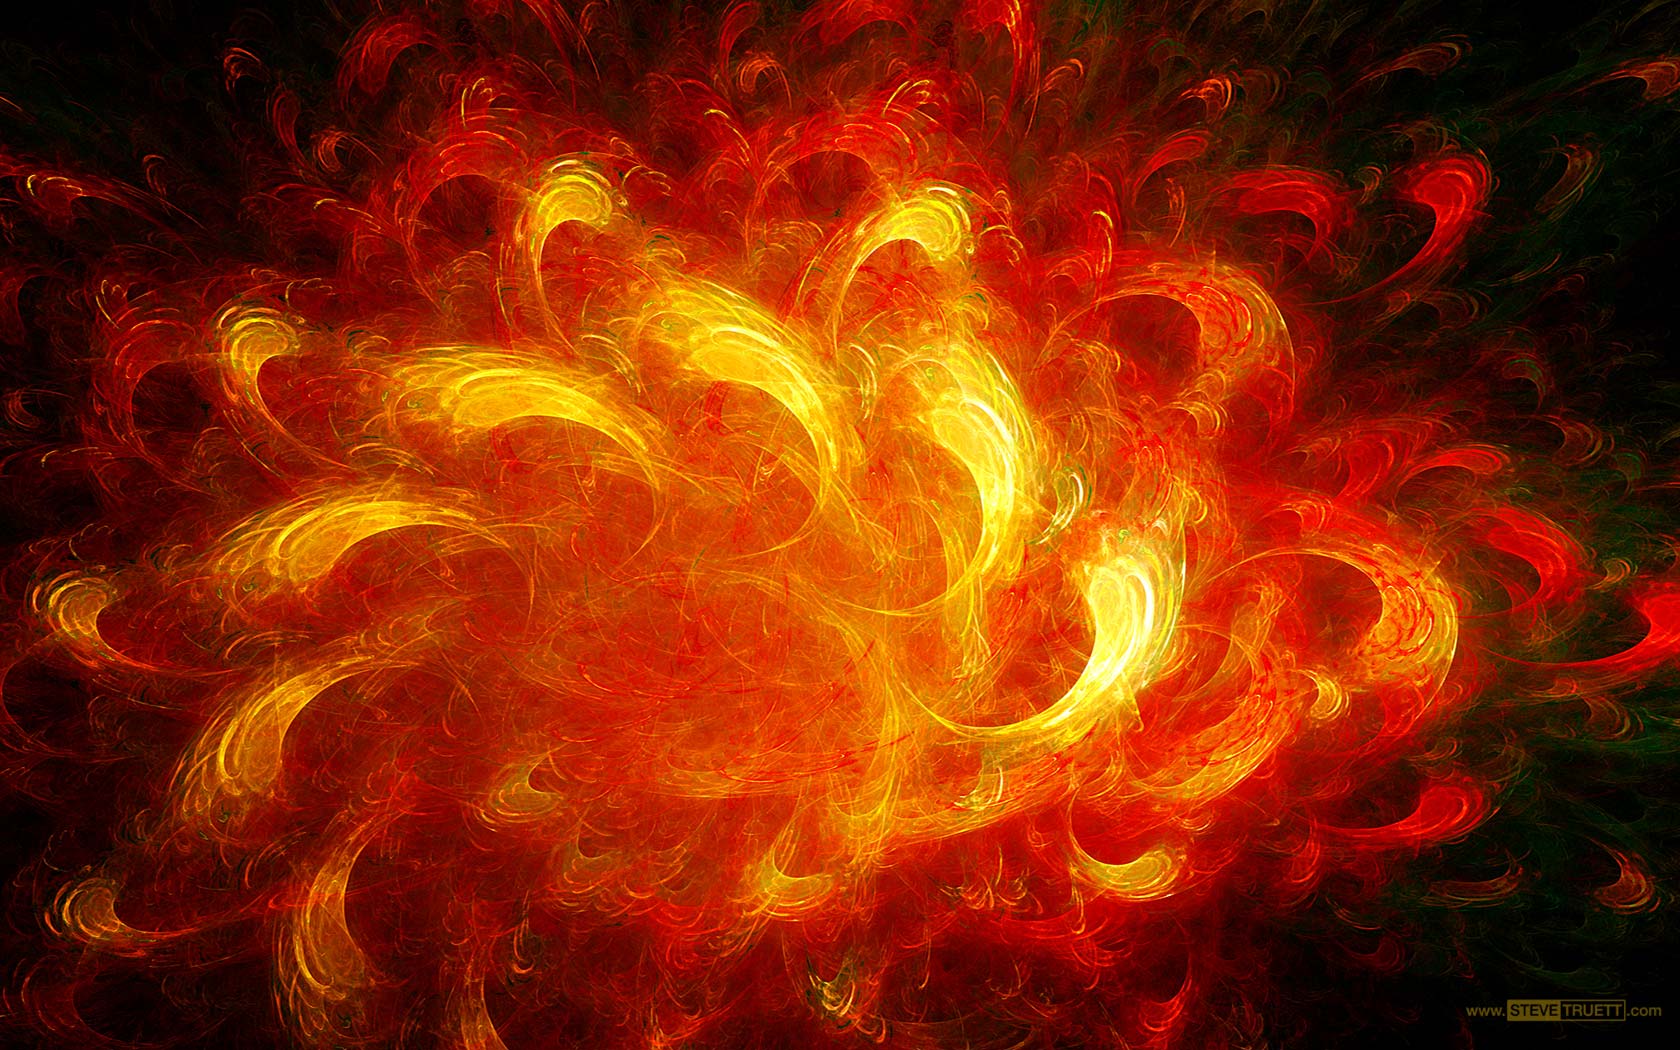 Fire Explosion Wallpaper Image